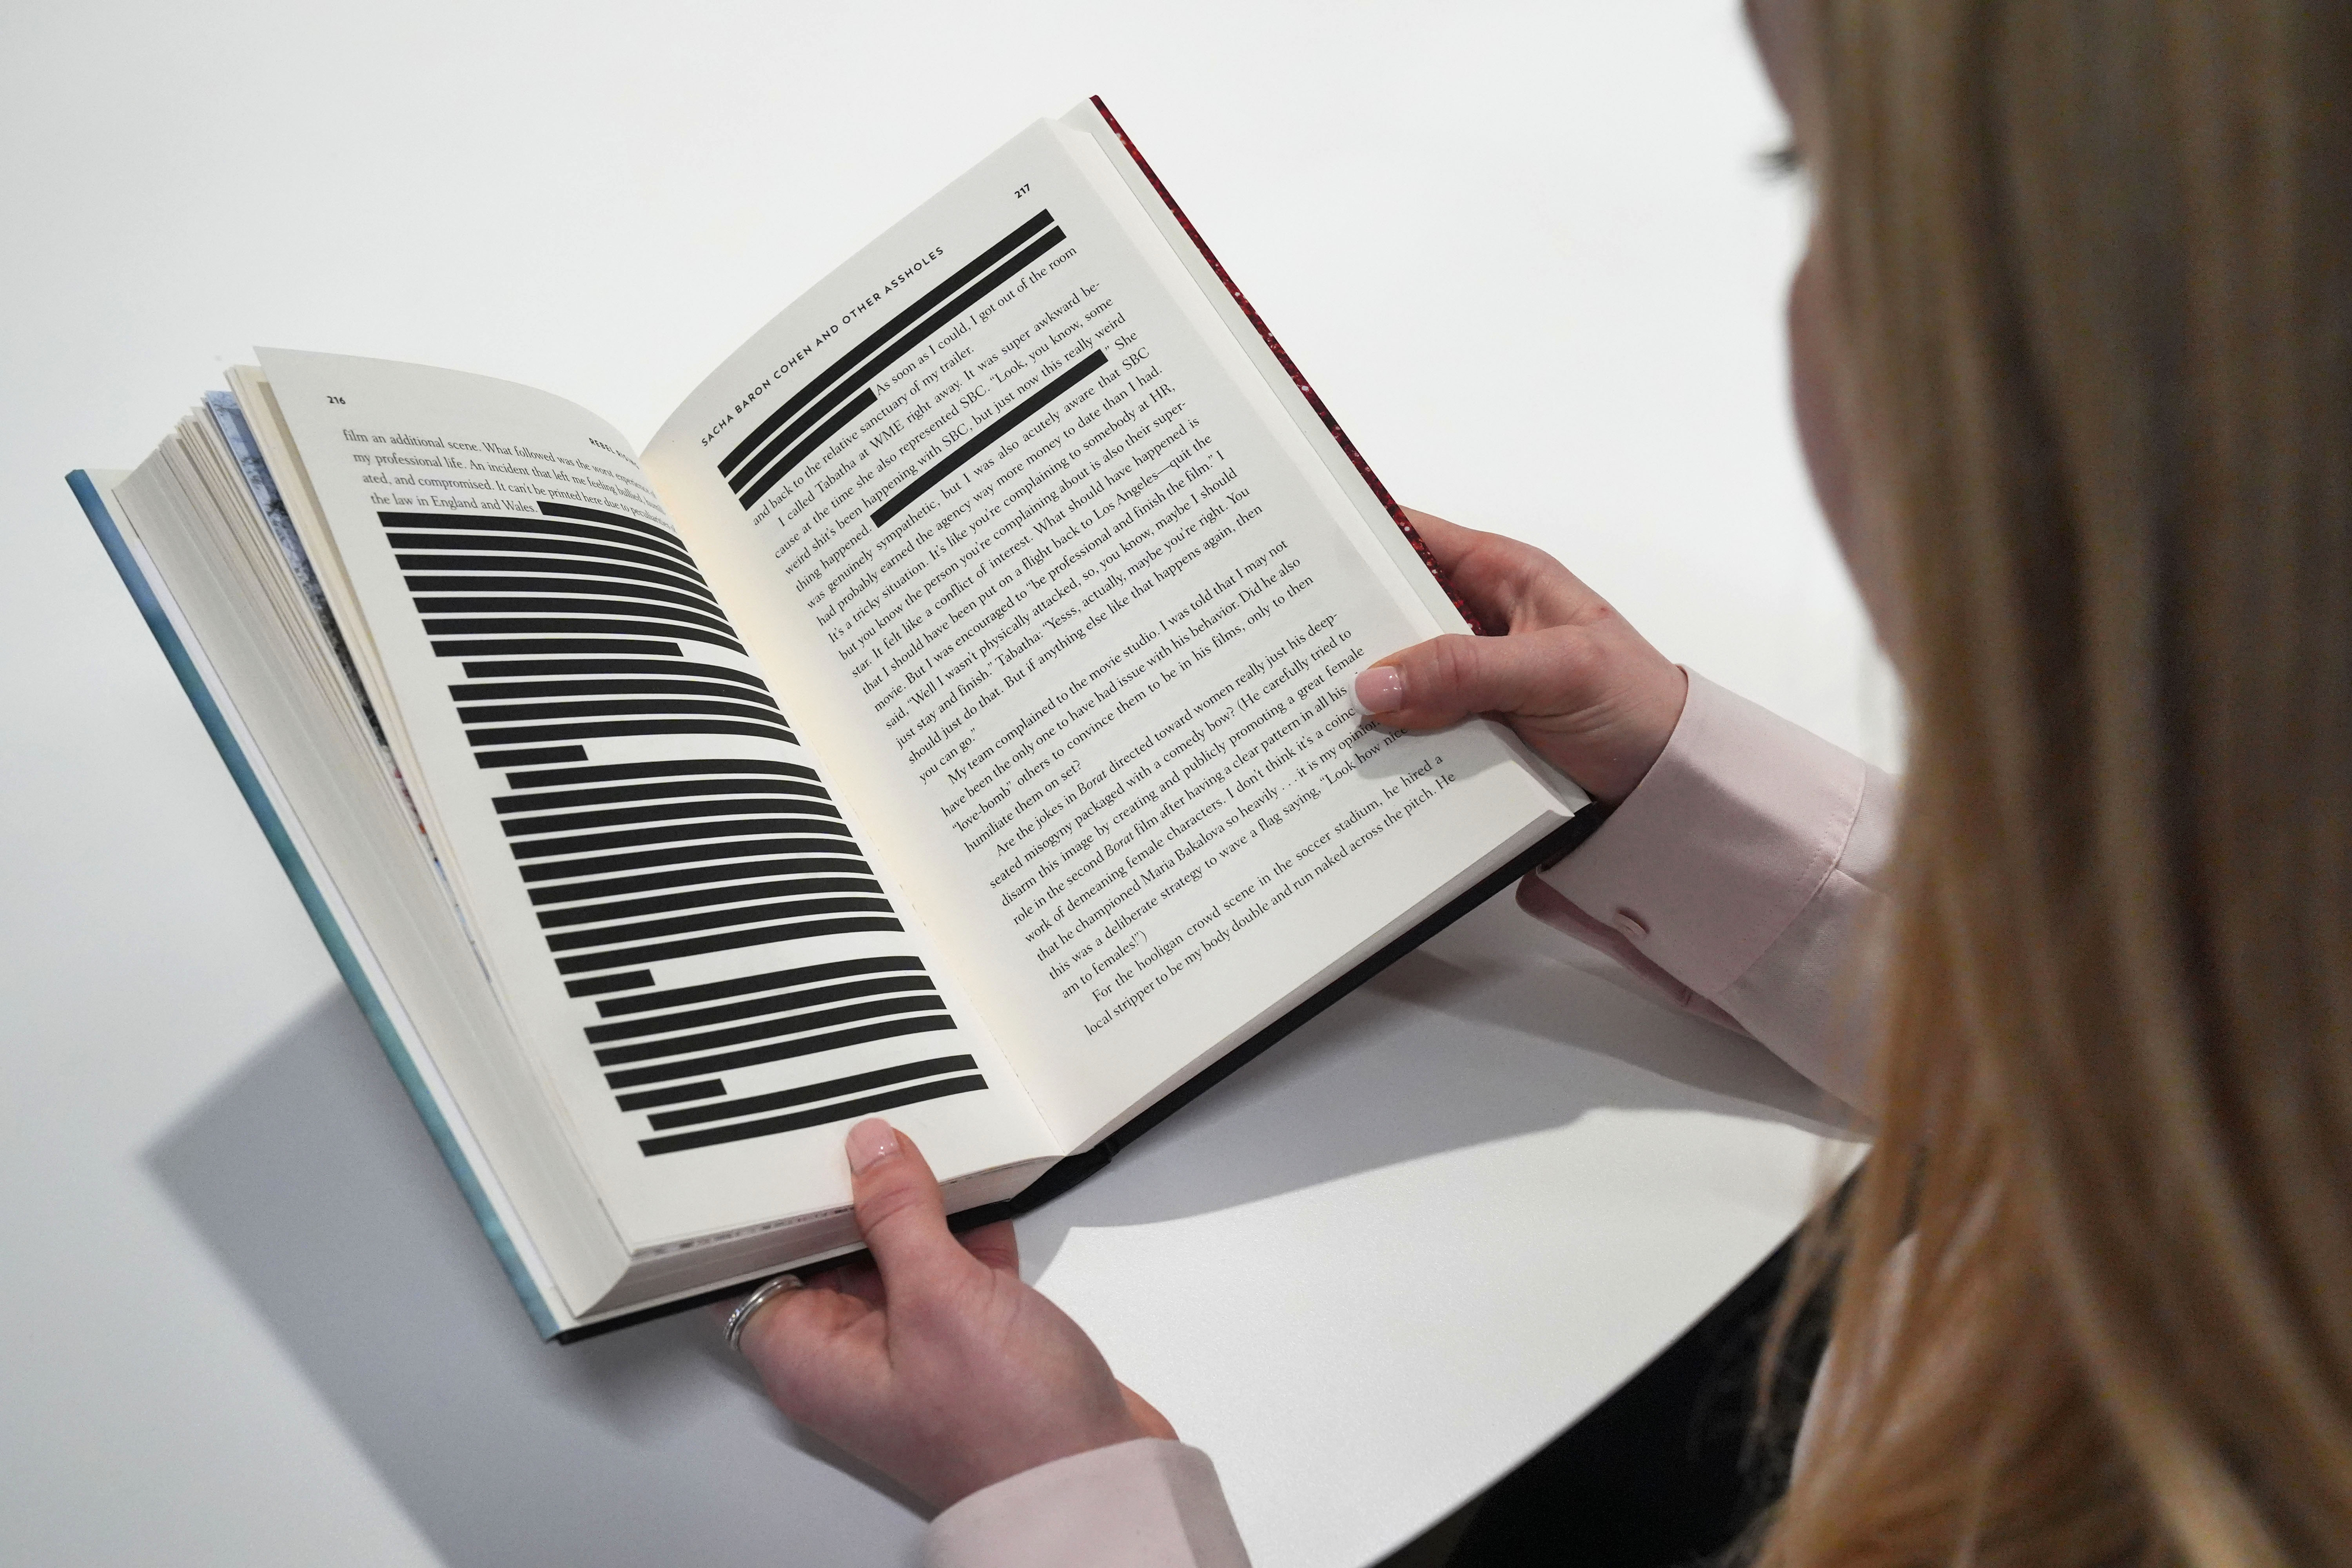 An individual holding a book with redacted text on visible pages